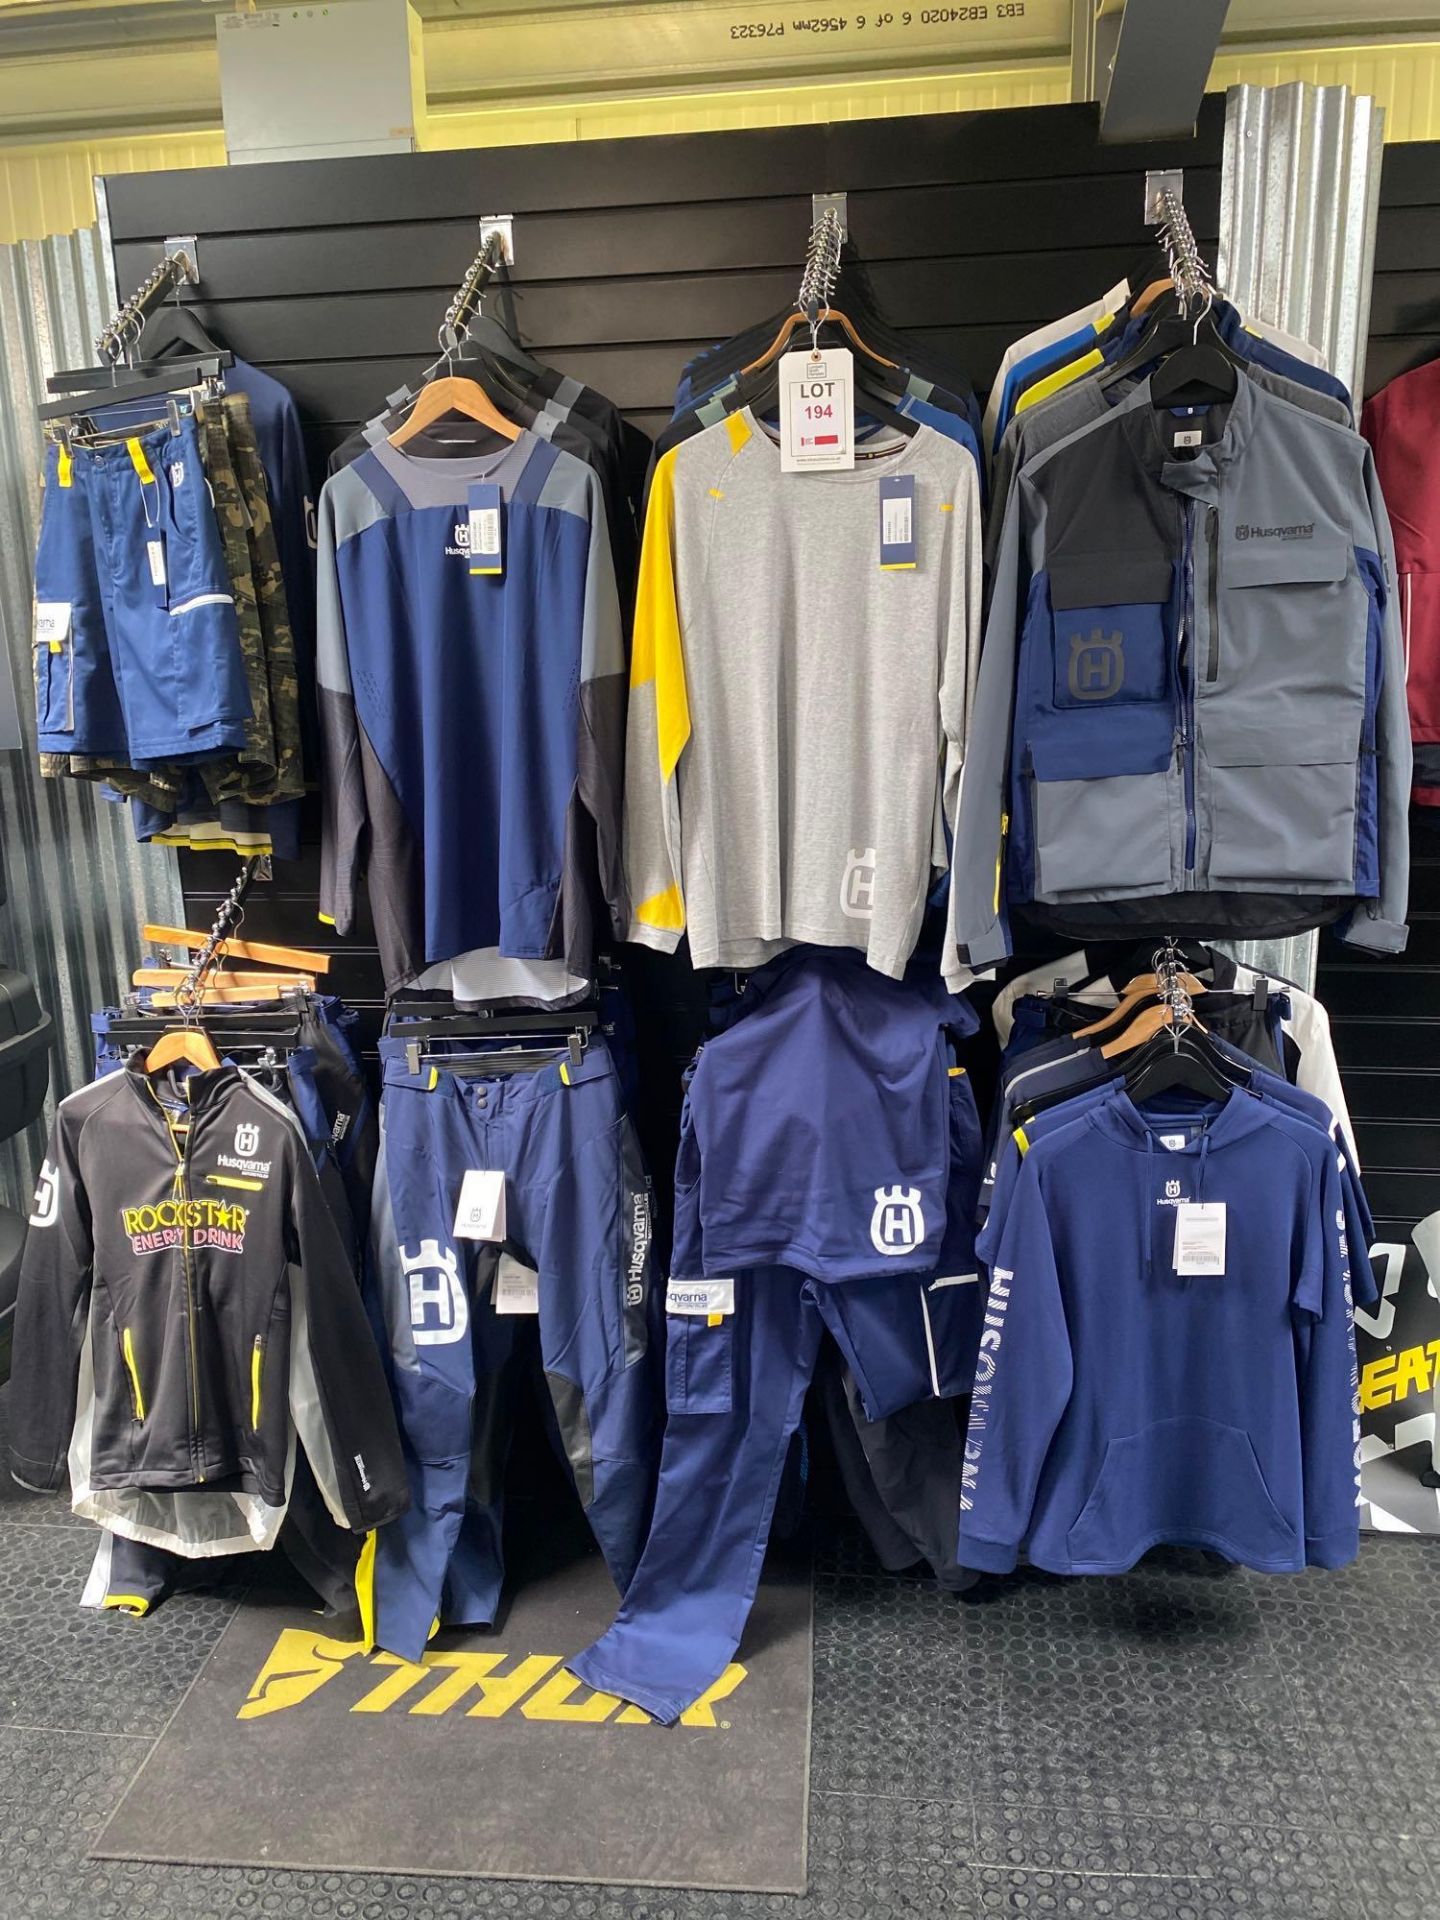 Large quantities of Husqvarna branded clothing as lotted